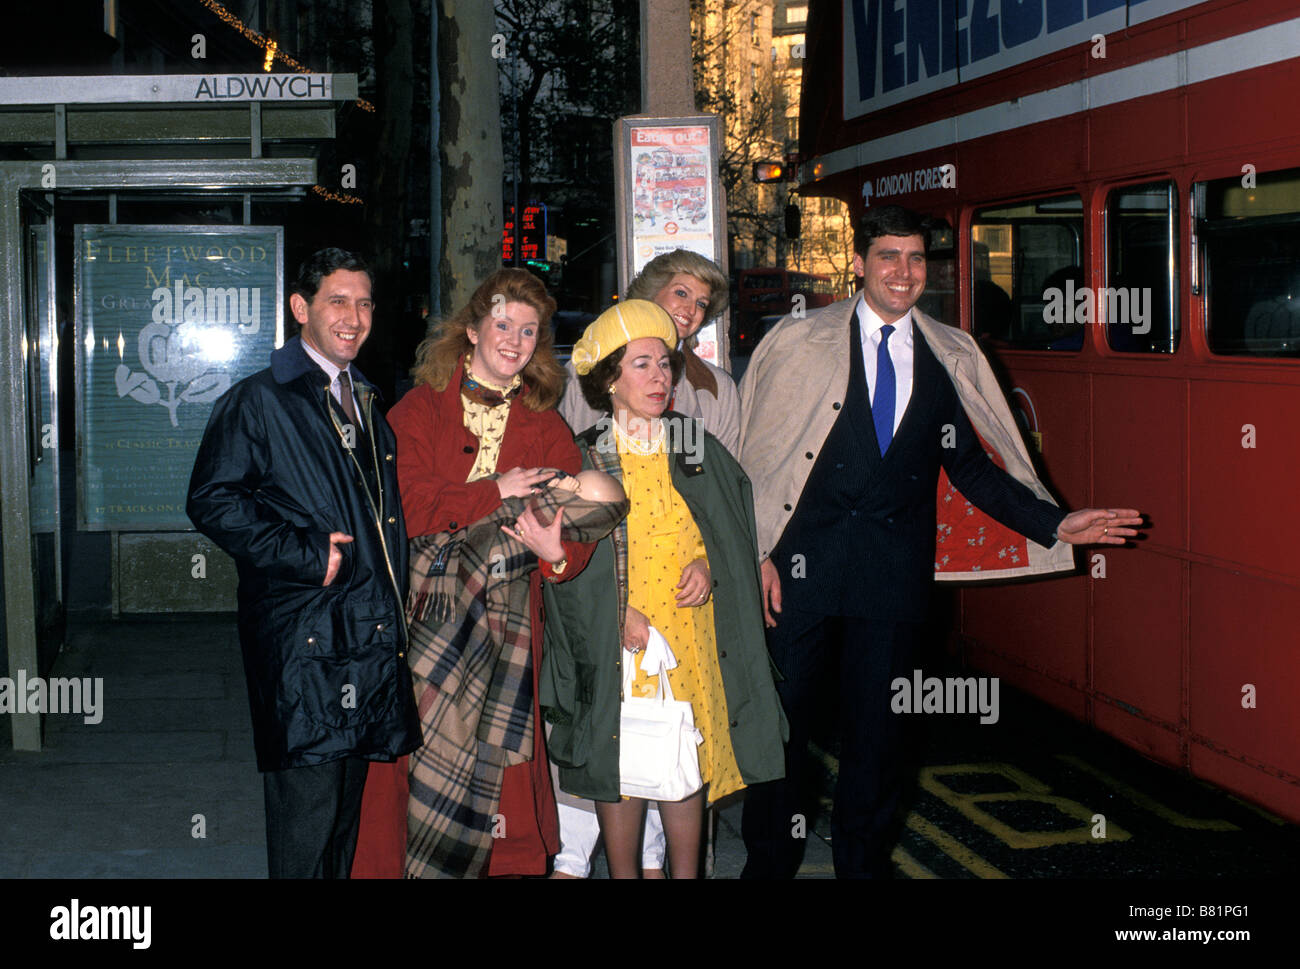 A group of the UK's Royal family impersonators wait at a bus stop to catch a red double-decker bus. London. England, UK,  Circa 1989 Stock Photo